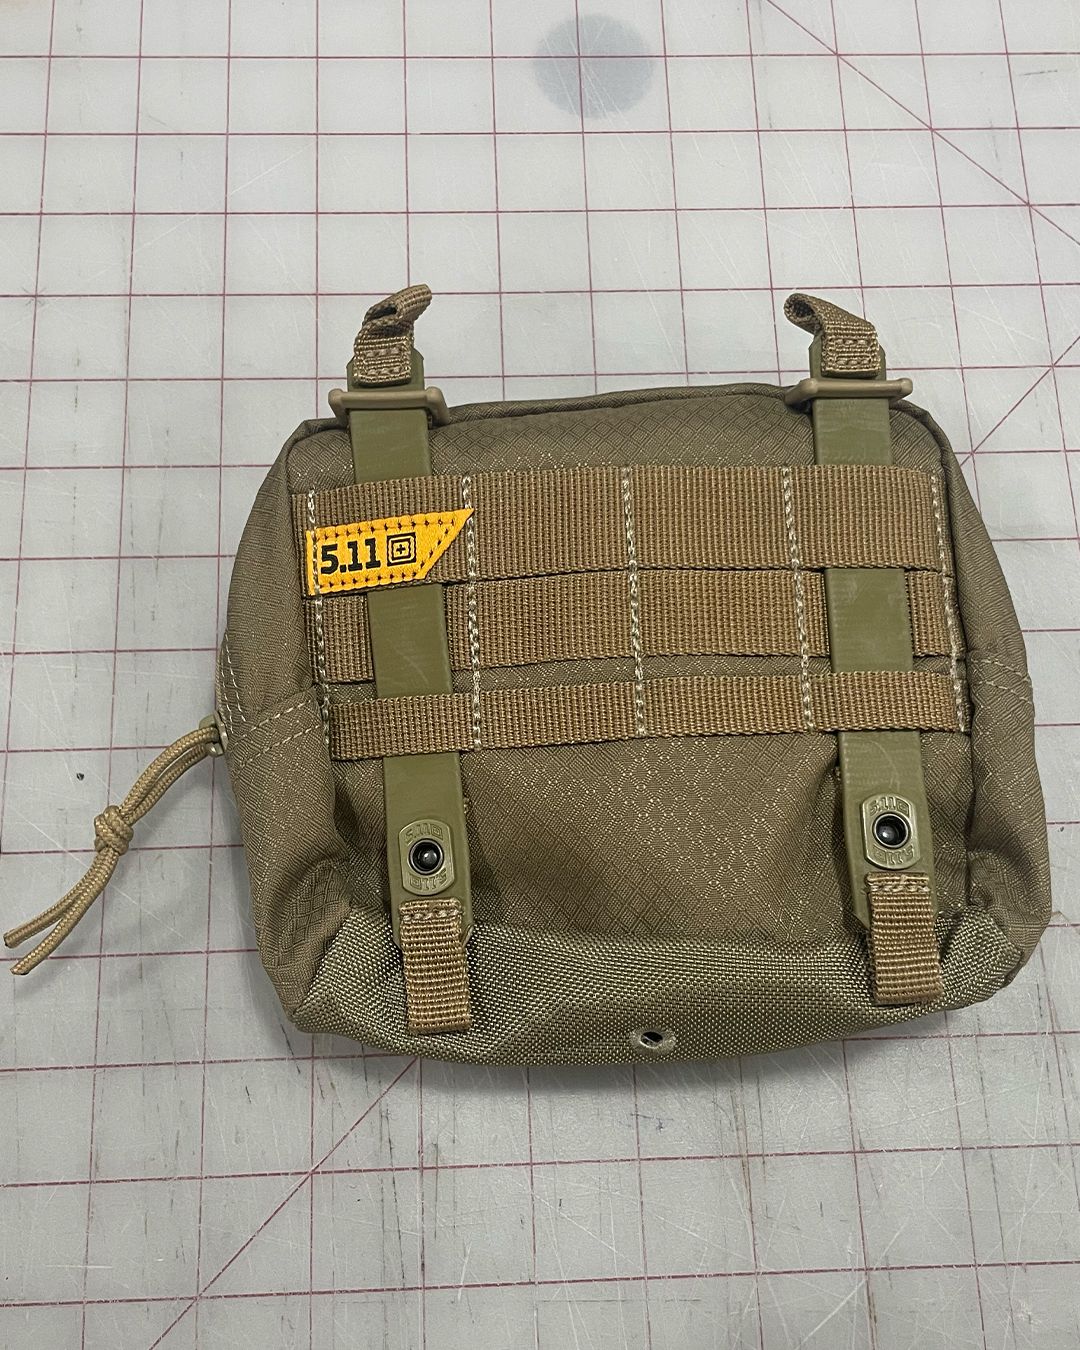 NEW – 5.11 Ignitor 6.5 Pouch